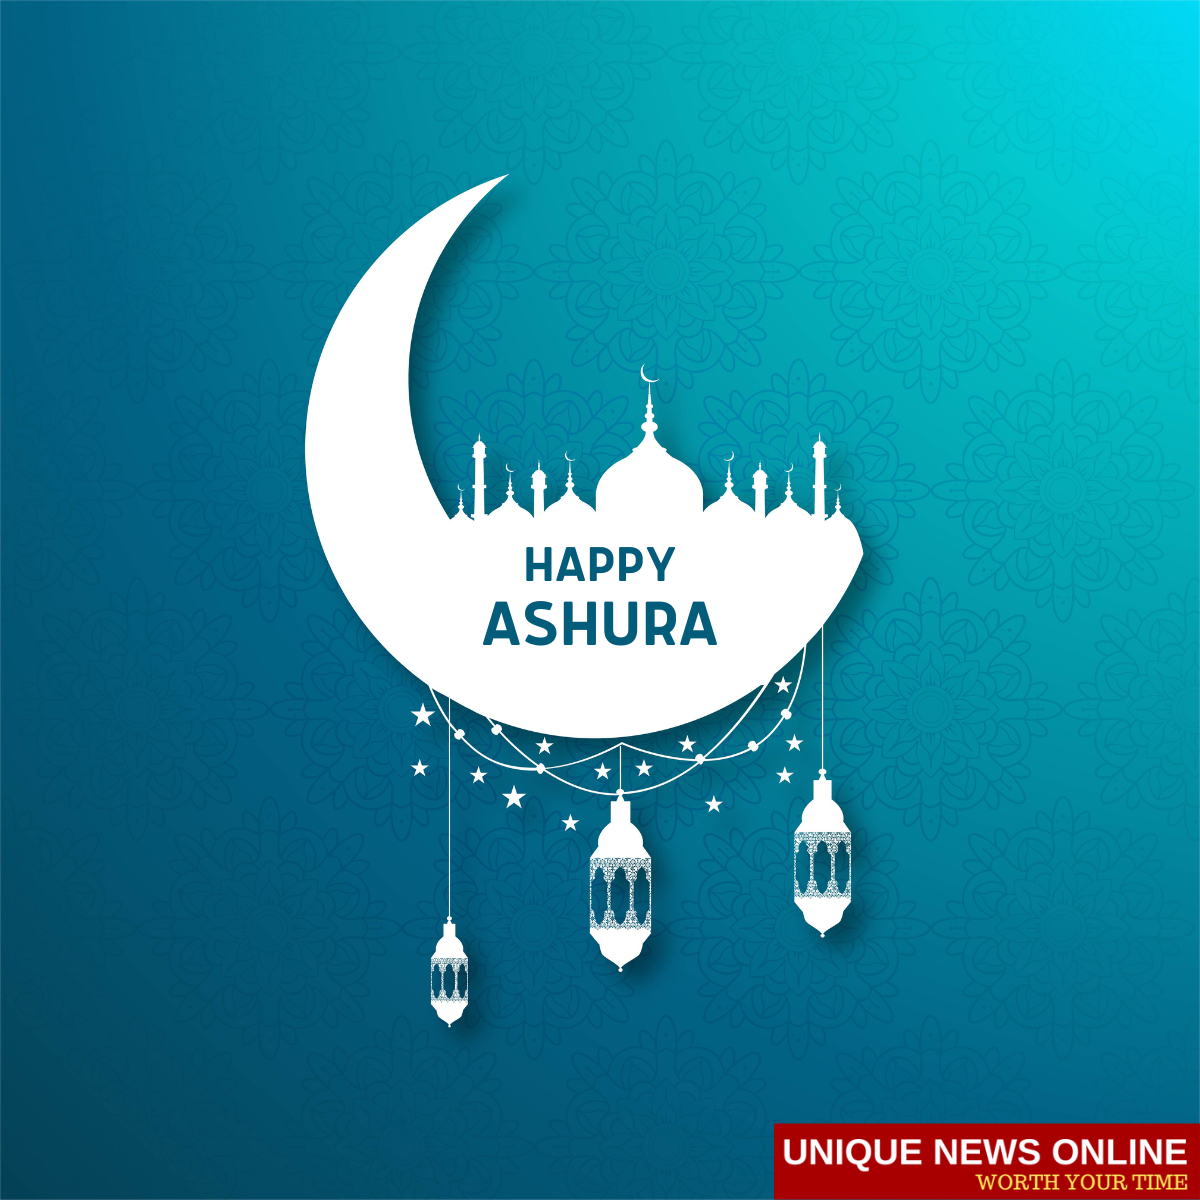 Ashura 2022: Arabic Messages, Wishes, Greetings, Posters, Dua, Quotes, and Shayari for Youm e-Ashura